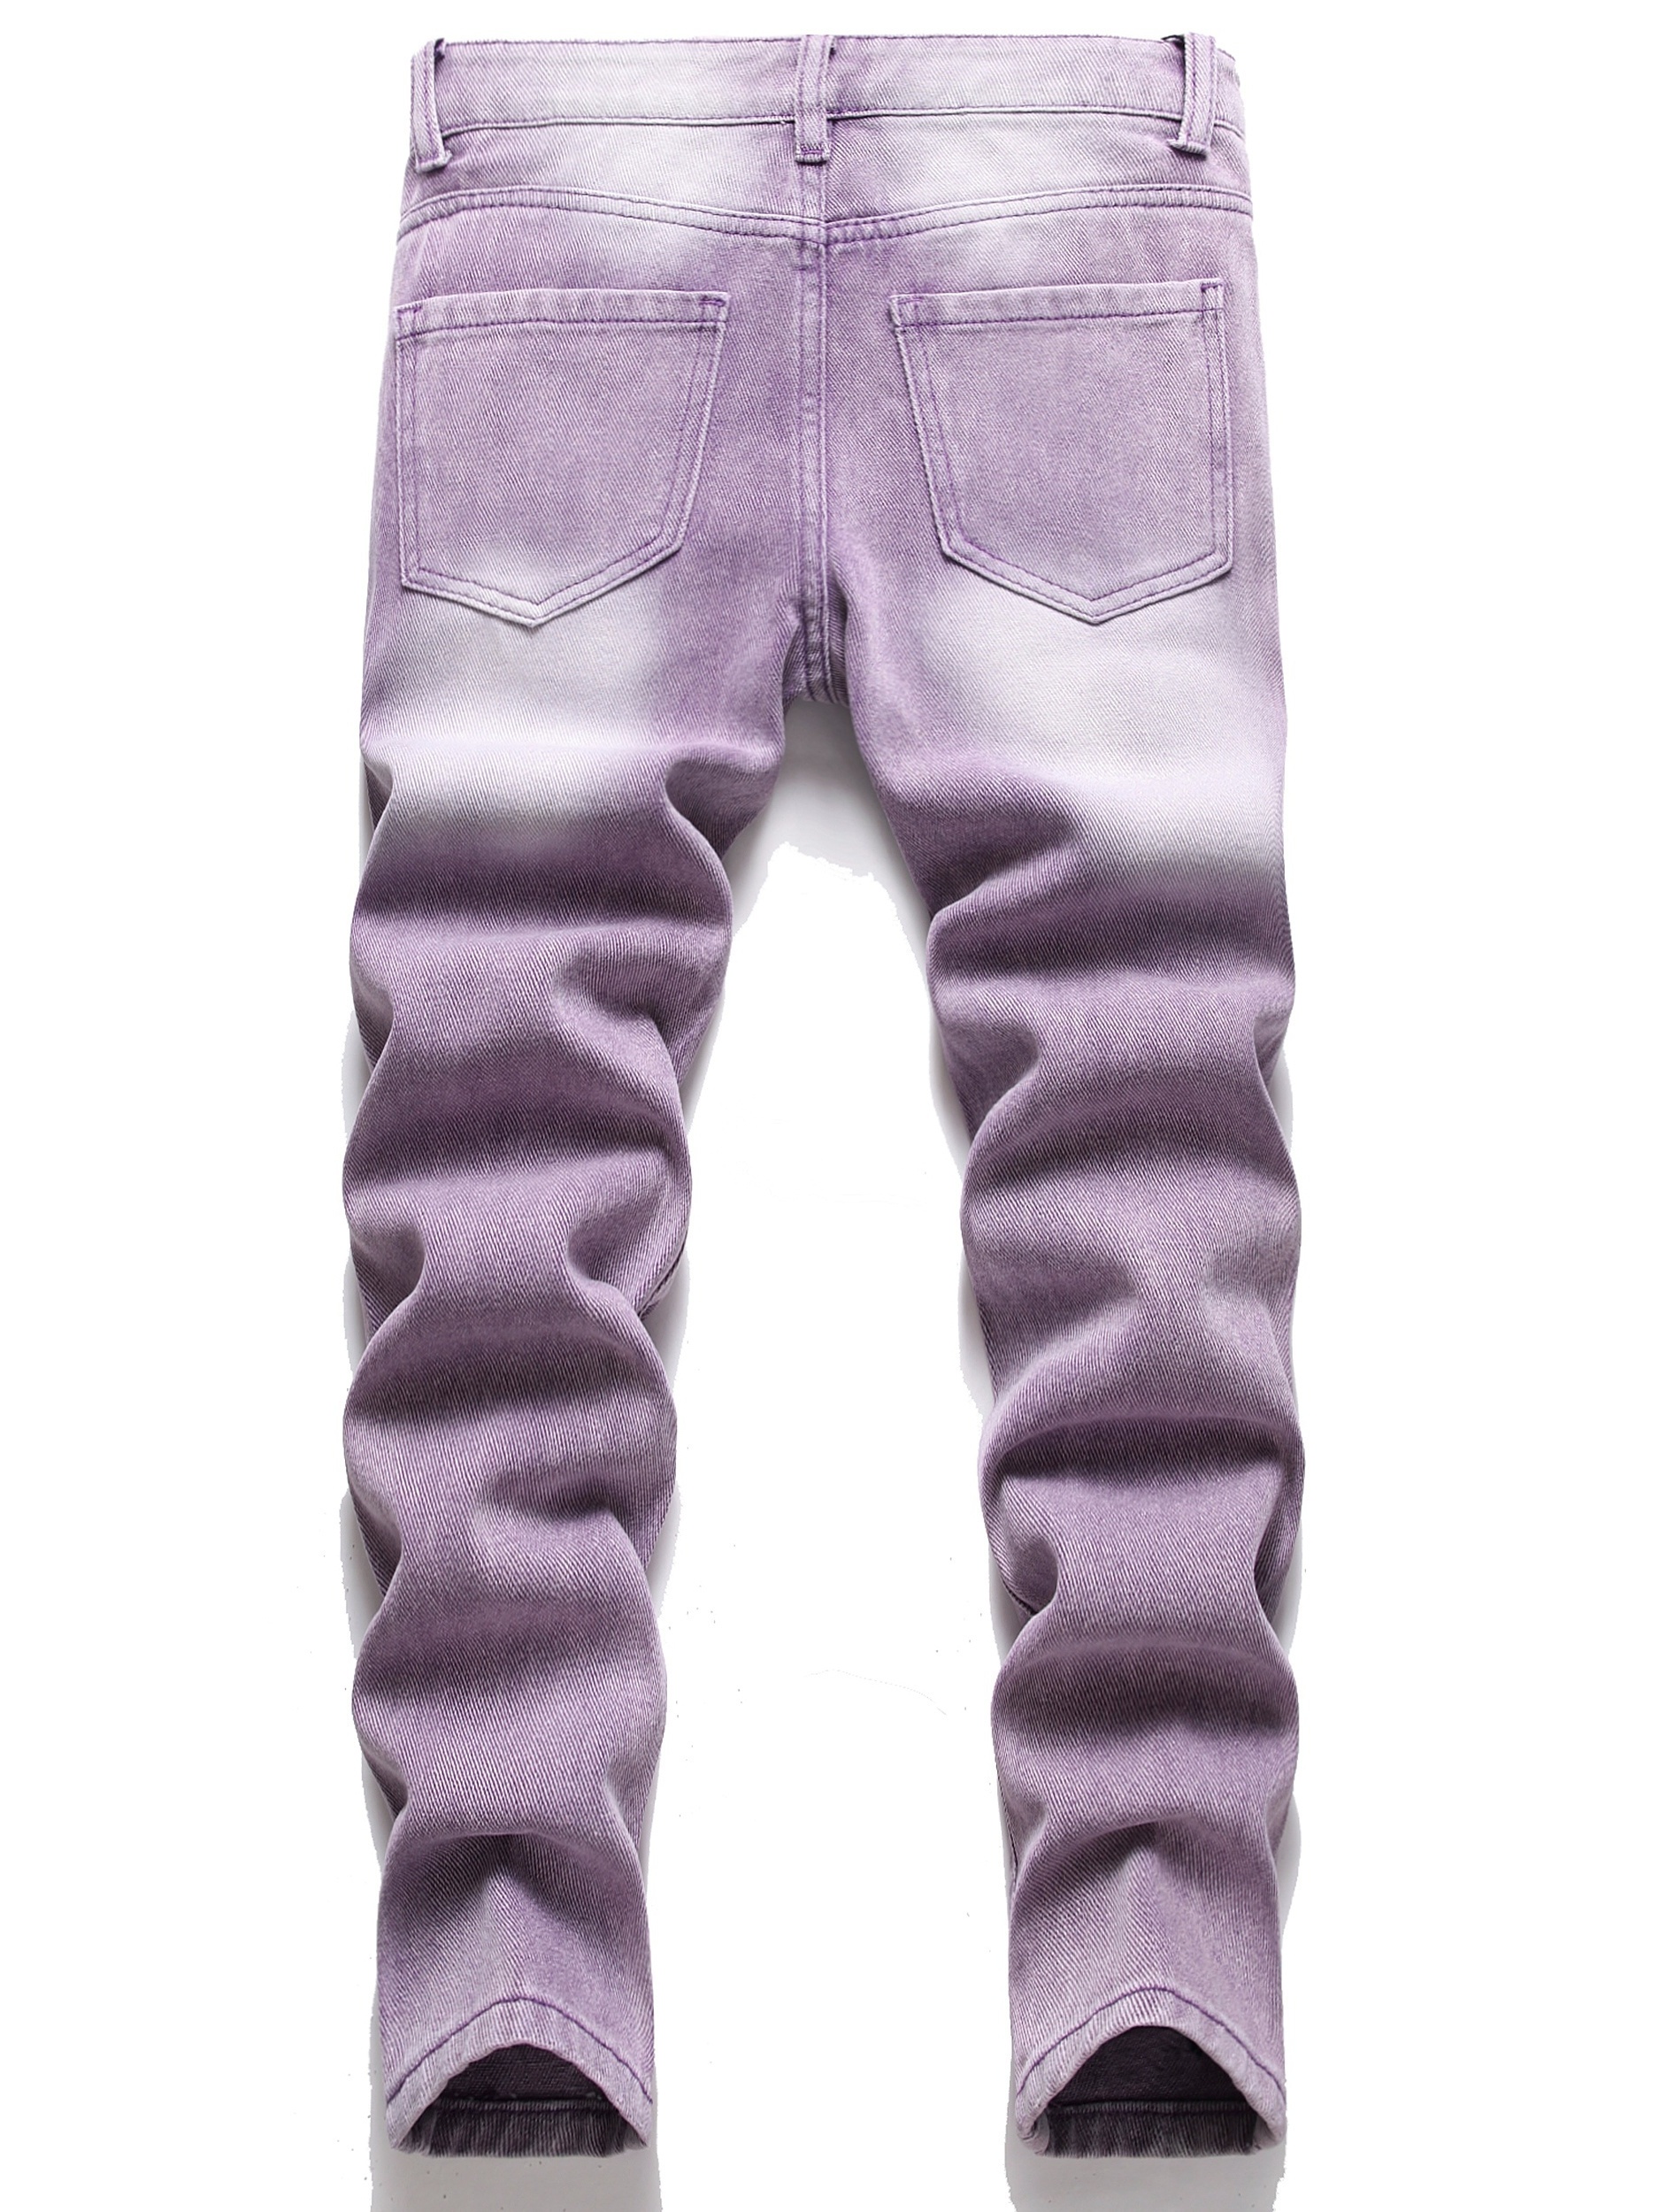 Wholesale boys purple jeans For A Pull-On Classic Look 